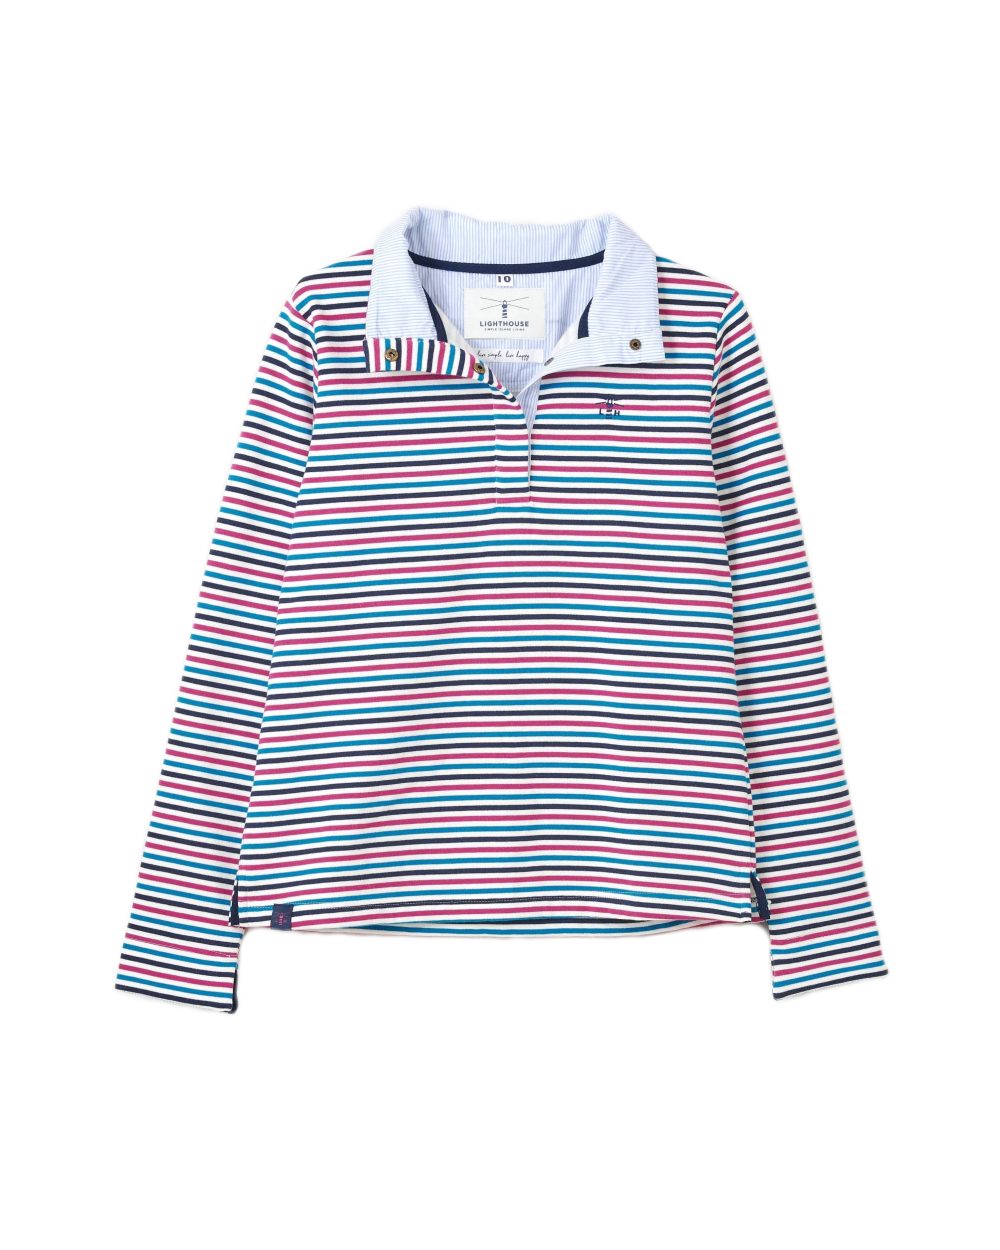 Lighthouse Ladies Haven Jersey in Berry/Teal Stripe 